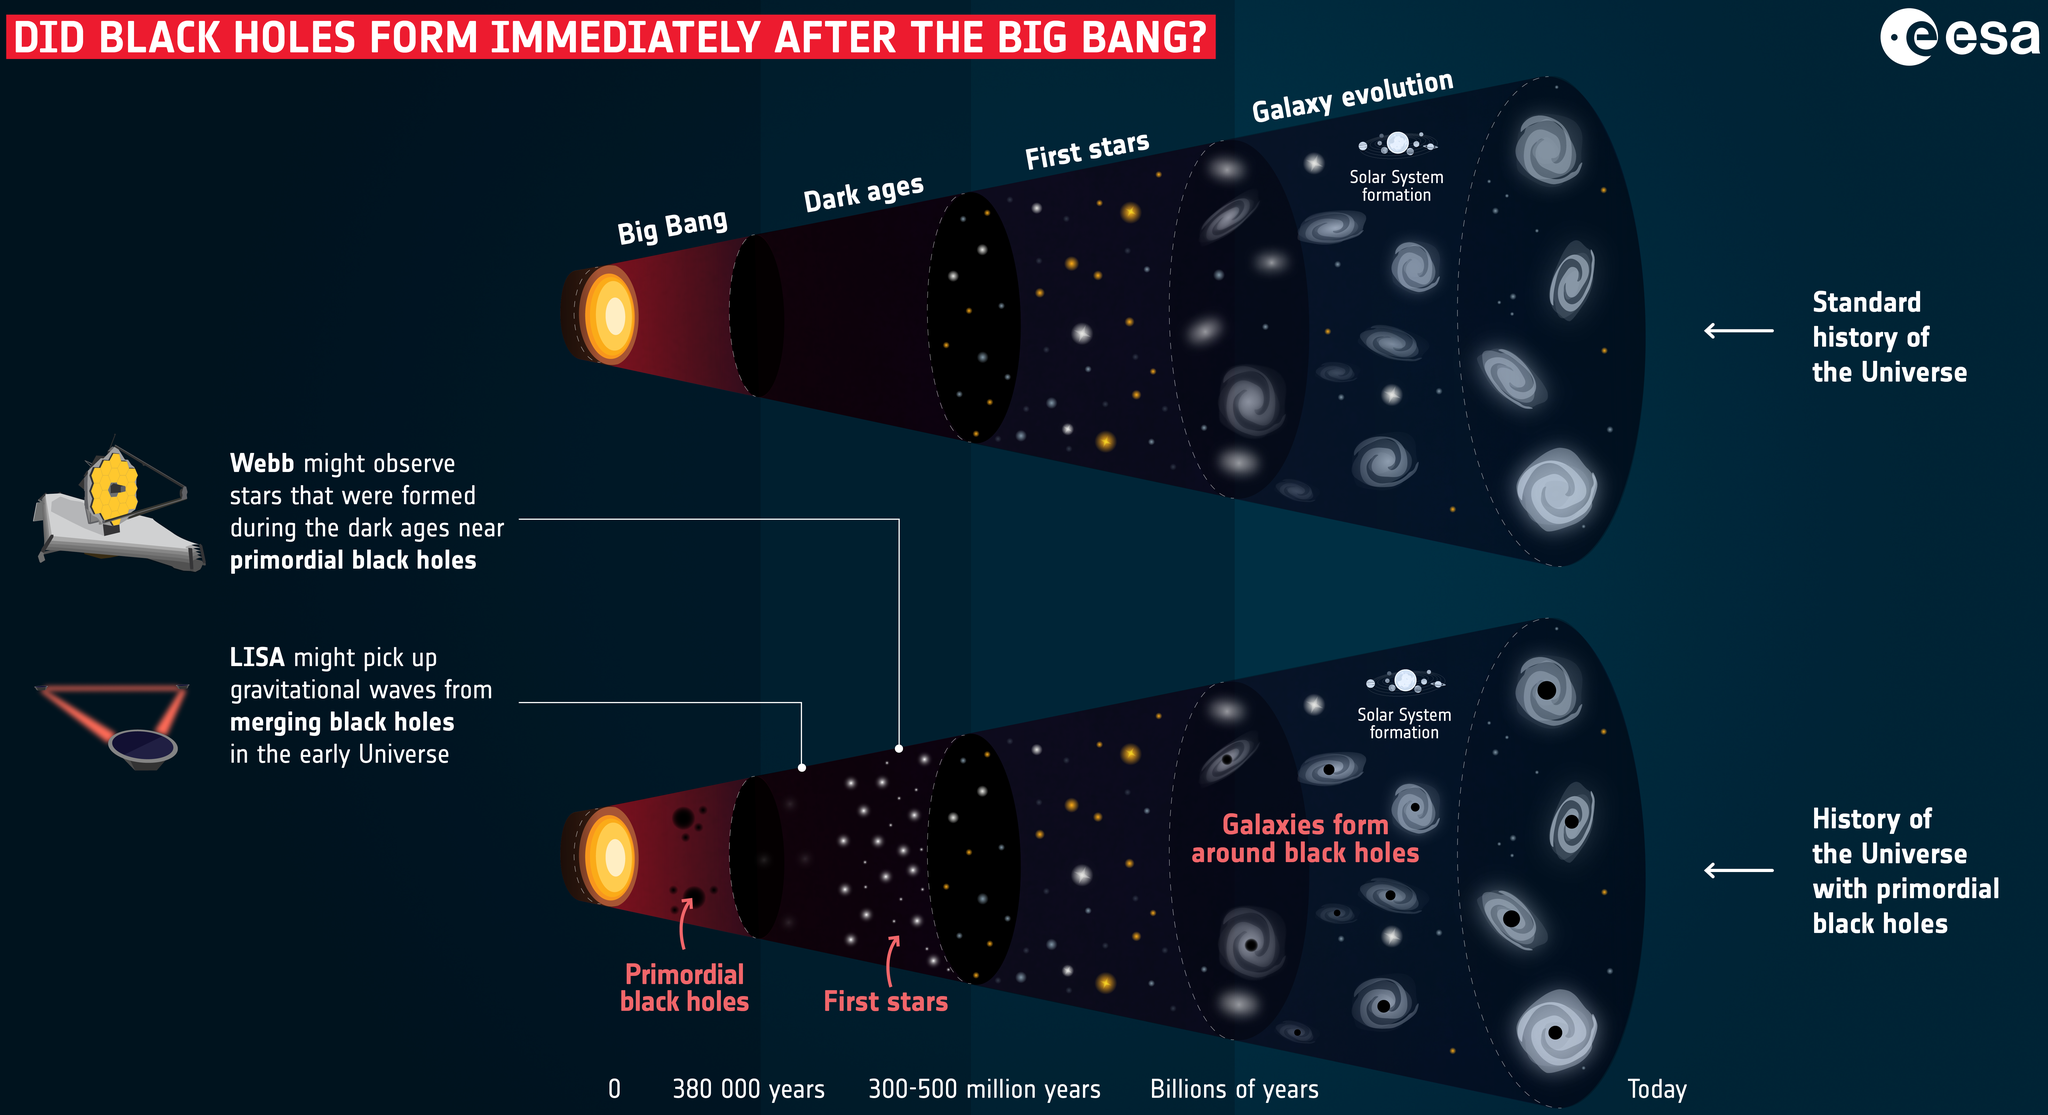 the history of the universe with primordial black holes